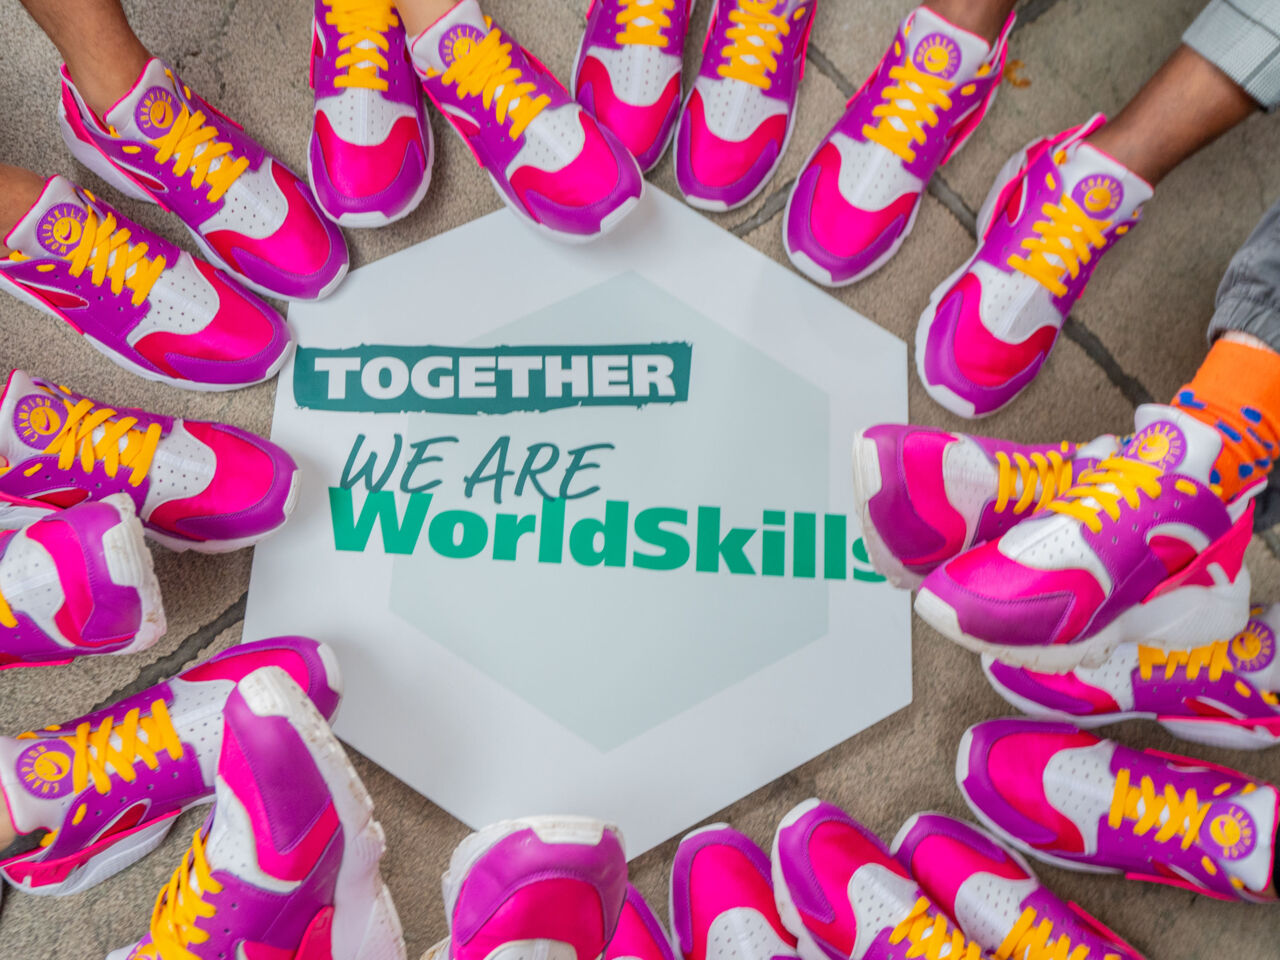 Champions leave a mark on WorldSkills General Assembly 2023